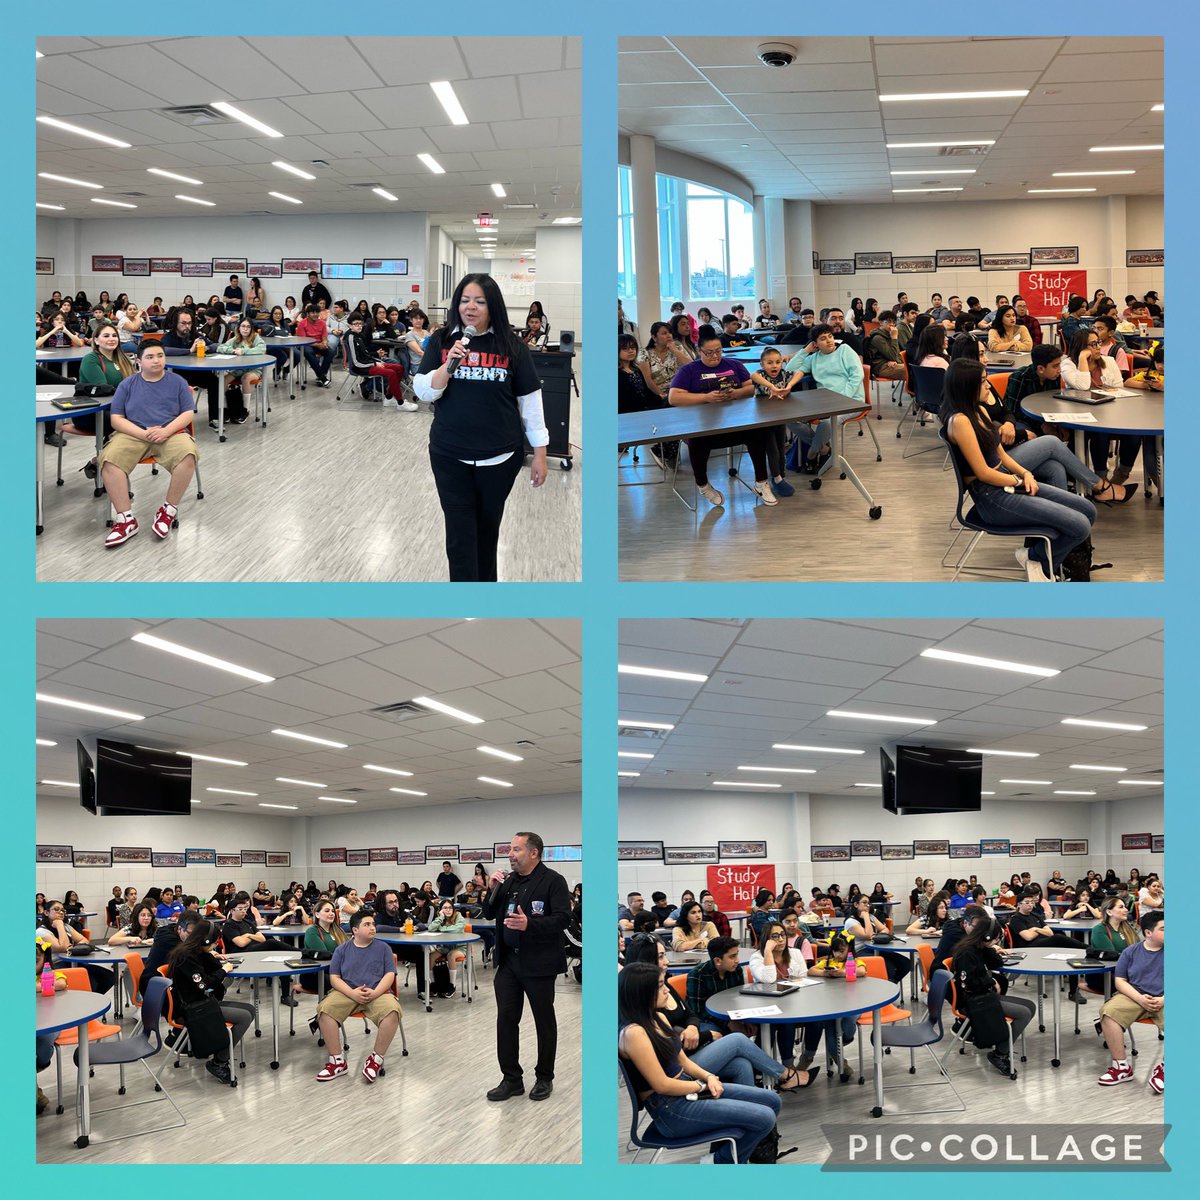 Finished SEC bridge camp with family engagement. We had a full house and we were excited to meet our future SEC families. They learned about the expectations, played games and took a tour of the campus! 🐾❤️@FGerardo_SHS @CfernandezShs @Socorro_HS